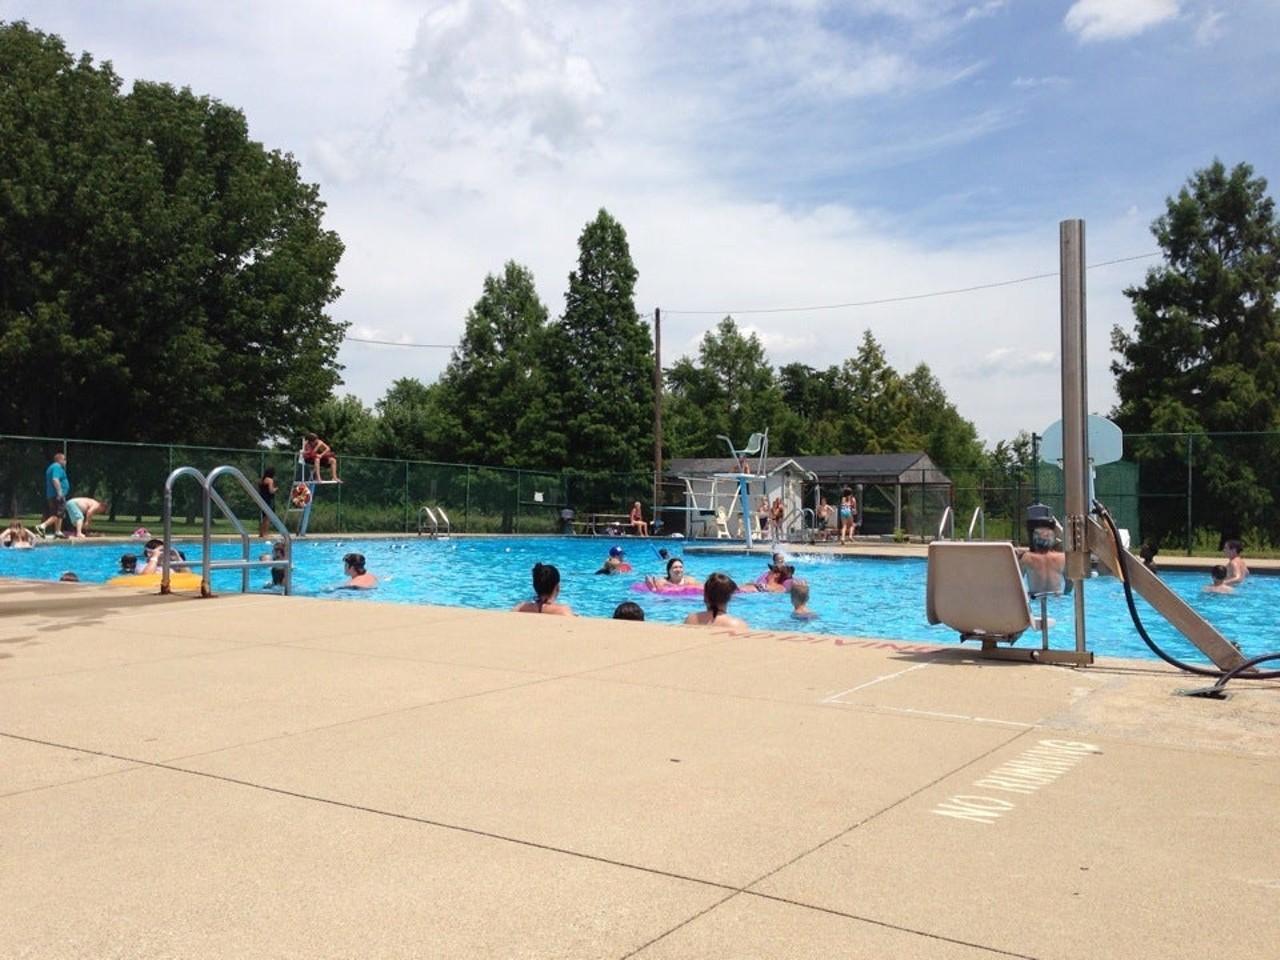 Sun Valley Pool 
6505 Bethany Ln 
Located in Valley Station, general admission is around $2-3 per person to visit this community pool. Photo via  Kevin M. on Foursquare